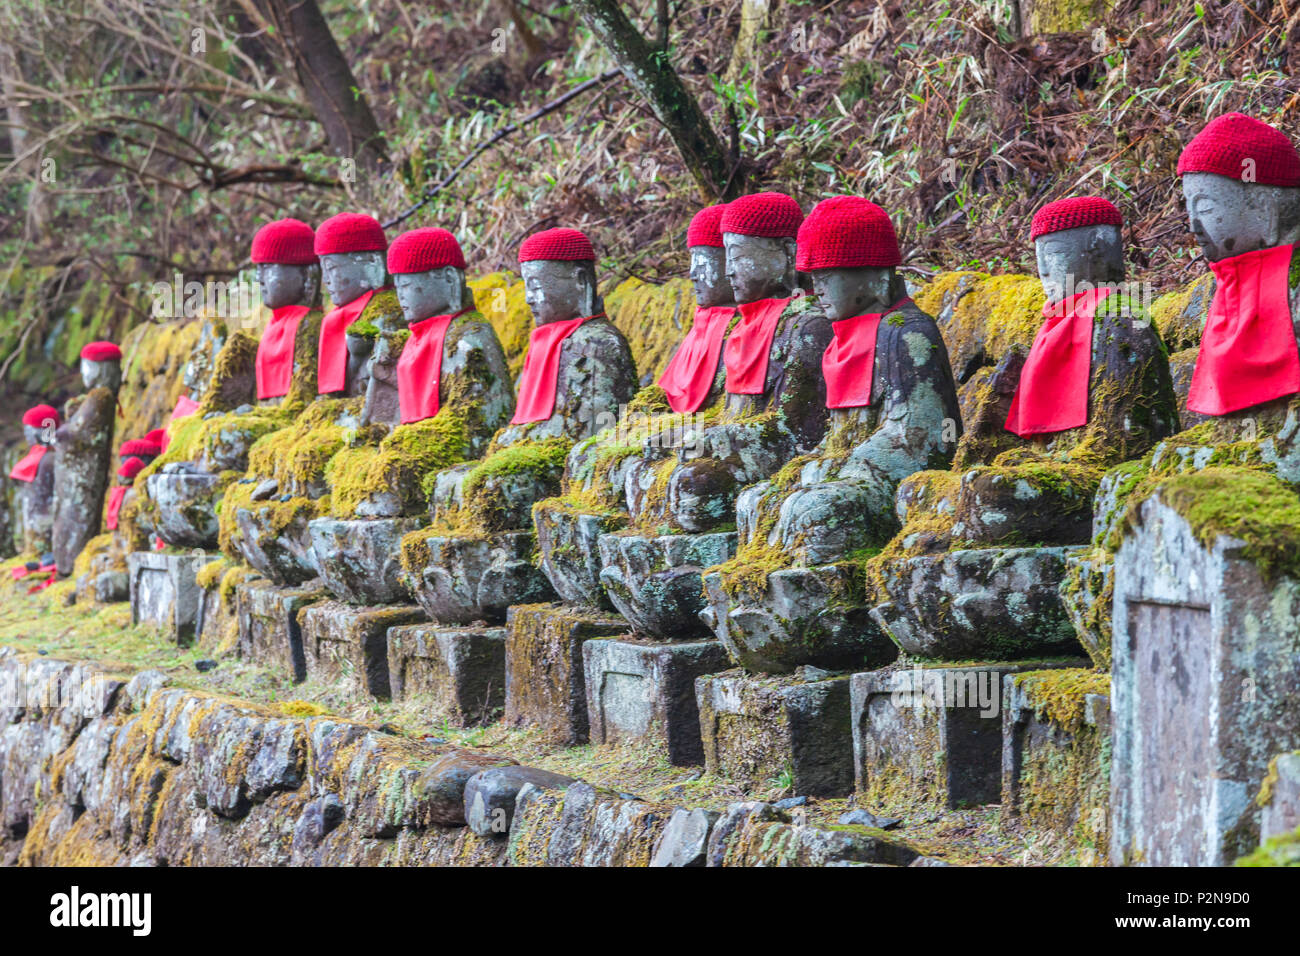 Jizo figures decorated with red knitted caps in Nikko, Tochigi Prefecture, Japan Stock Photo